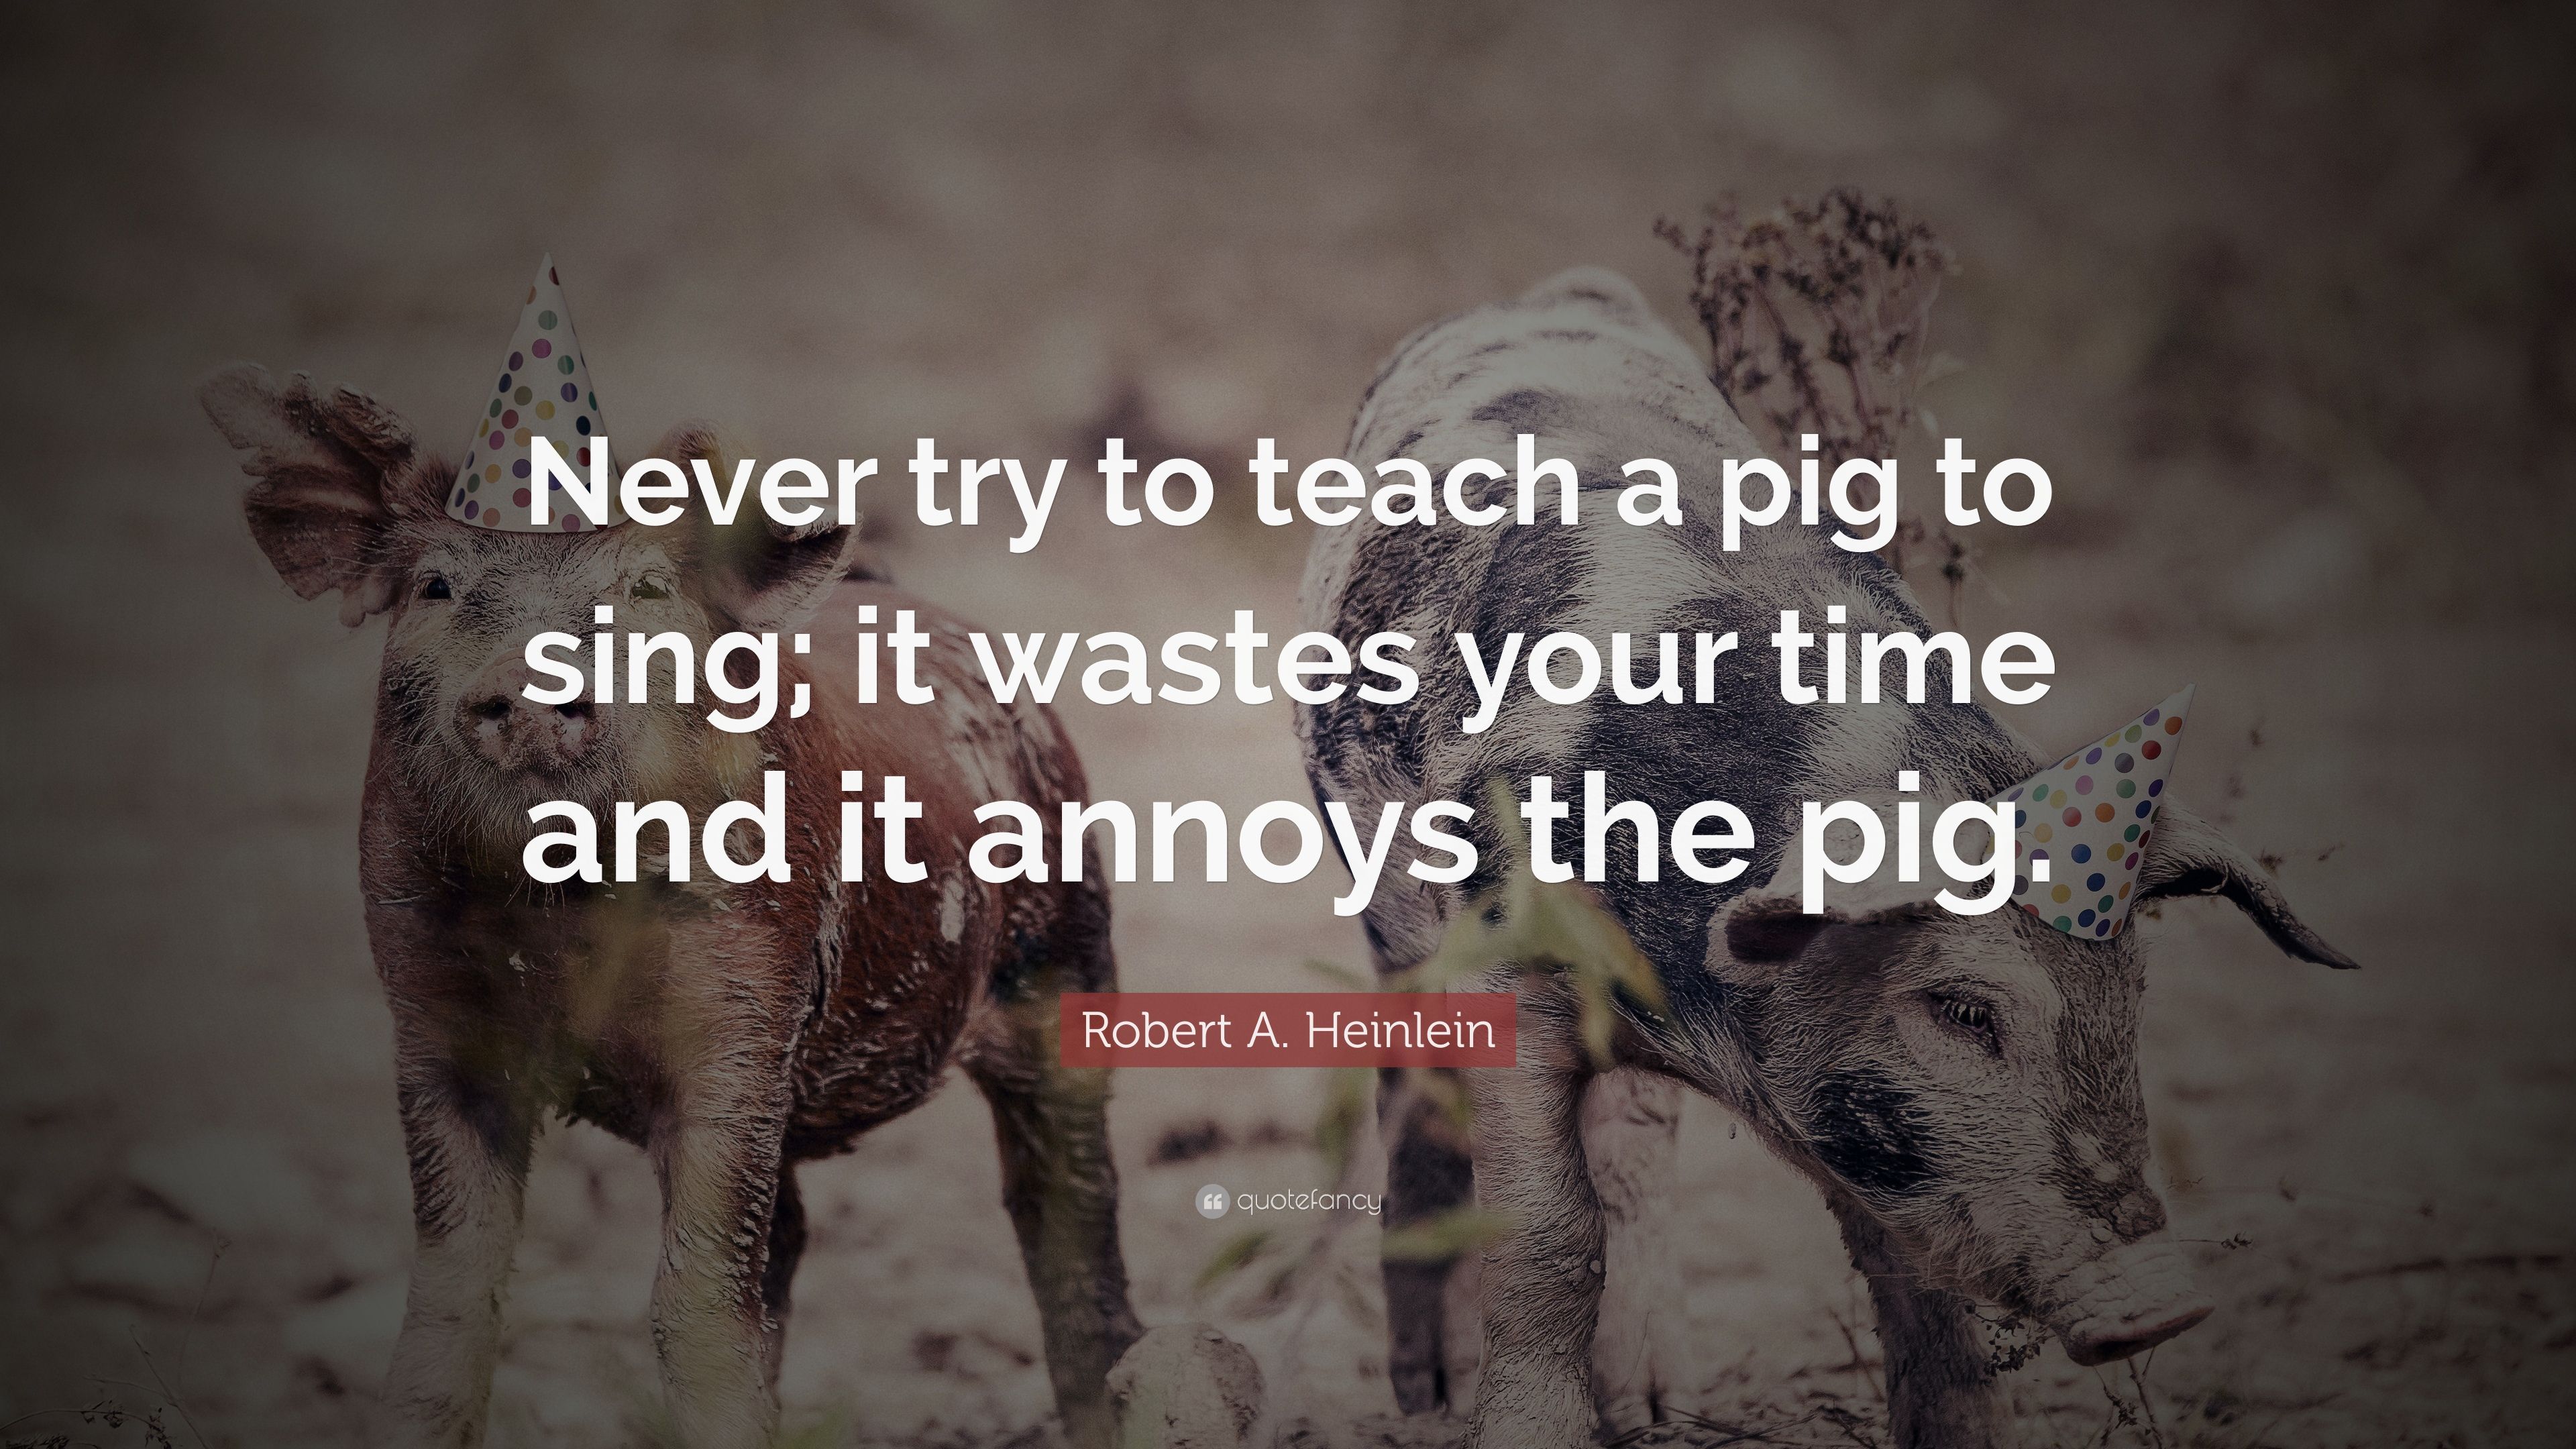 124124-Robert-A-Heinlein-Quote-Never-try-to-teach-a-pig-to-sing-it-wastes.jpg